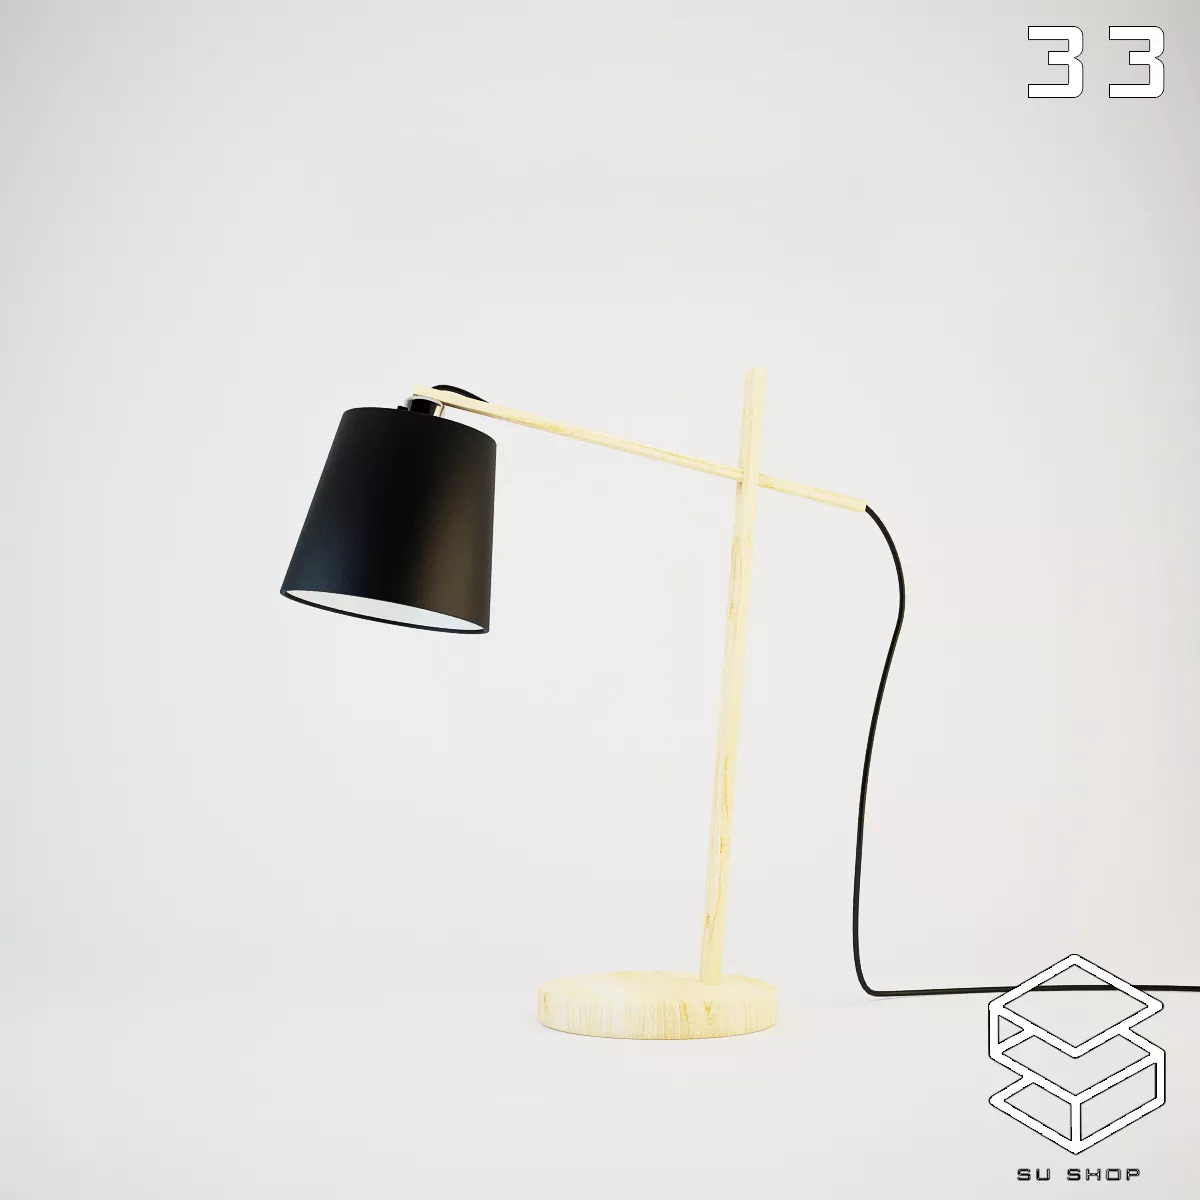 MODERN TABLE LAMP - SKETCHUP 3D MODEL - VRAY OR ENSCAPE - ID14826